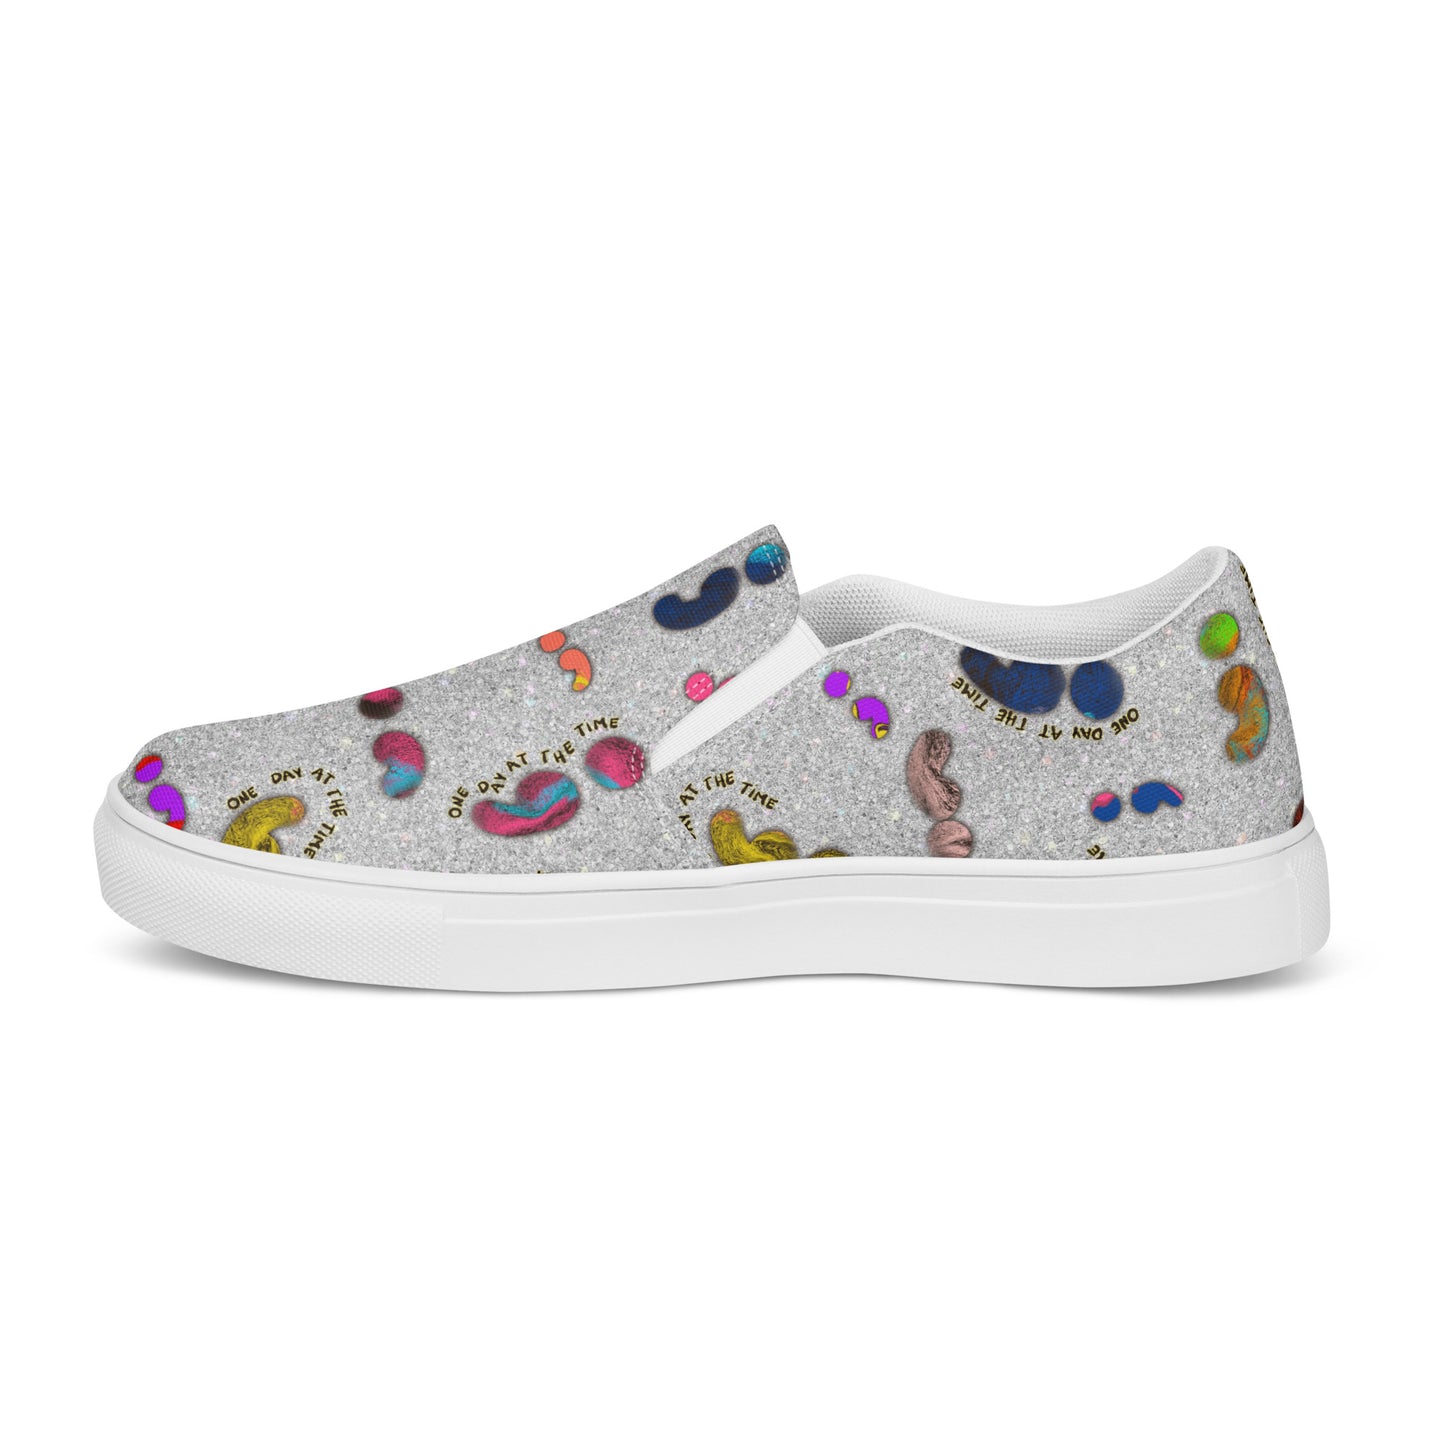 Semi-colon One Day Ay The Time Silver Glitter Women’s slip-on canvas shoes